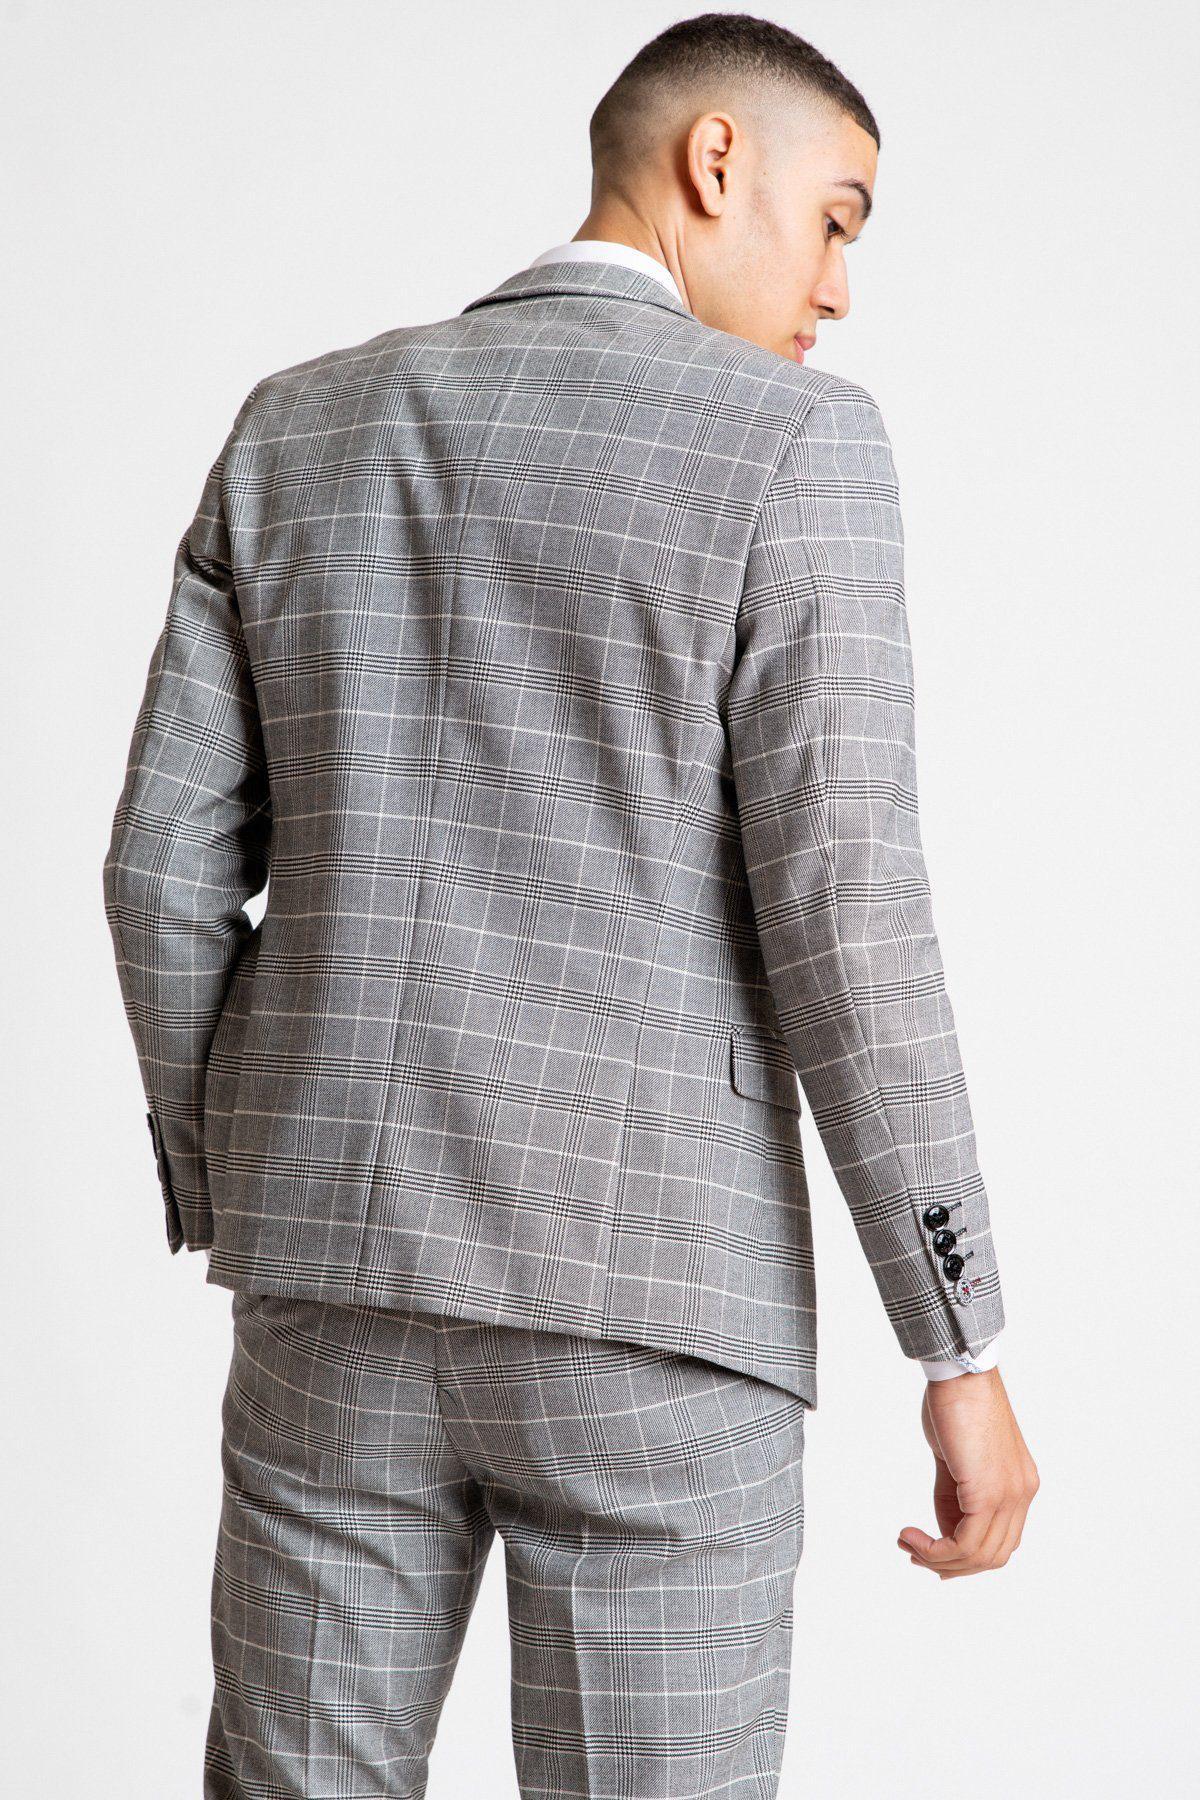 Man wearing Ross Grey Check Three Piece Suit - back view - Marc Darcy Menswear